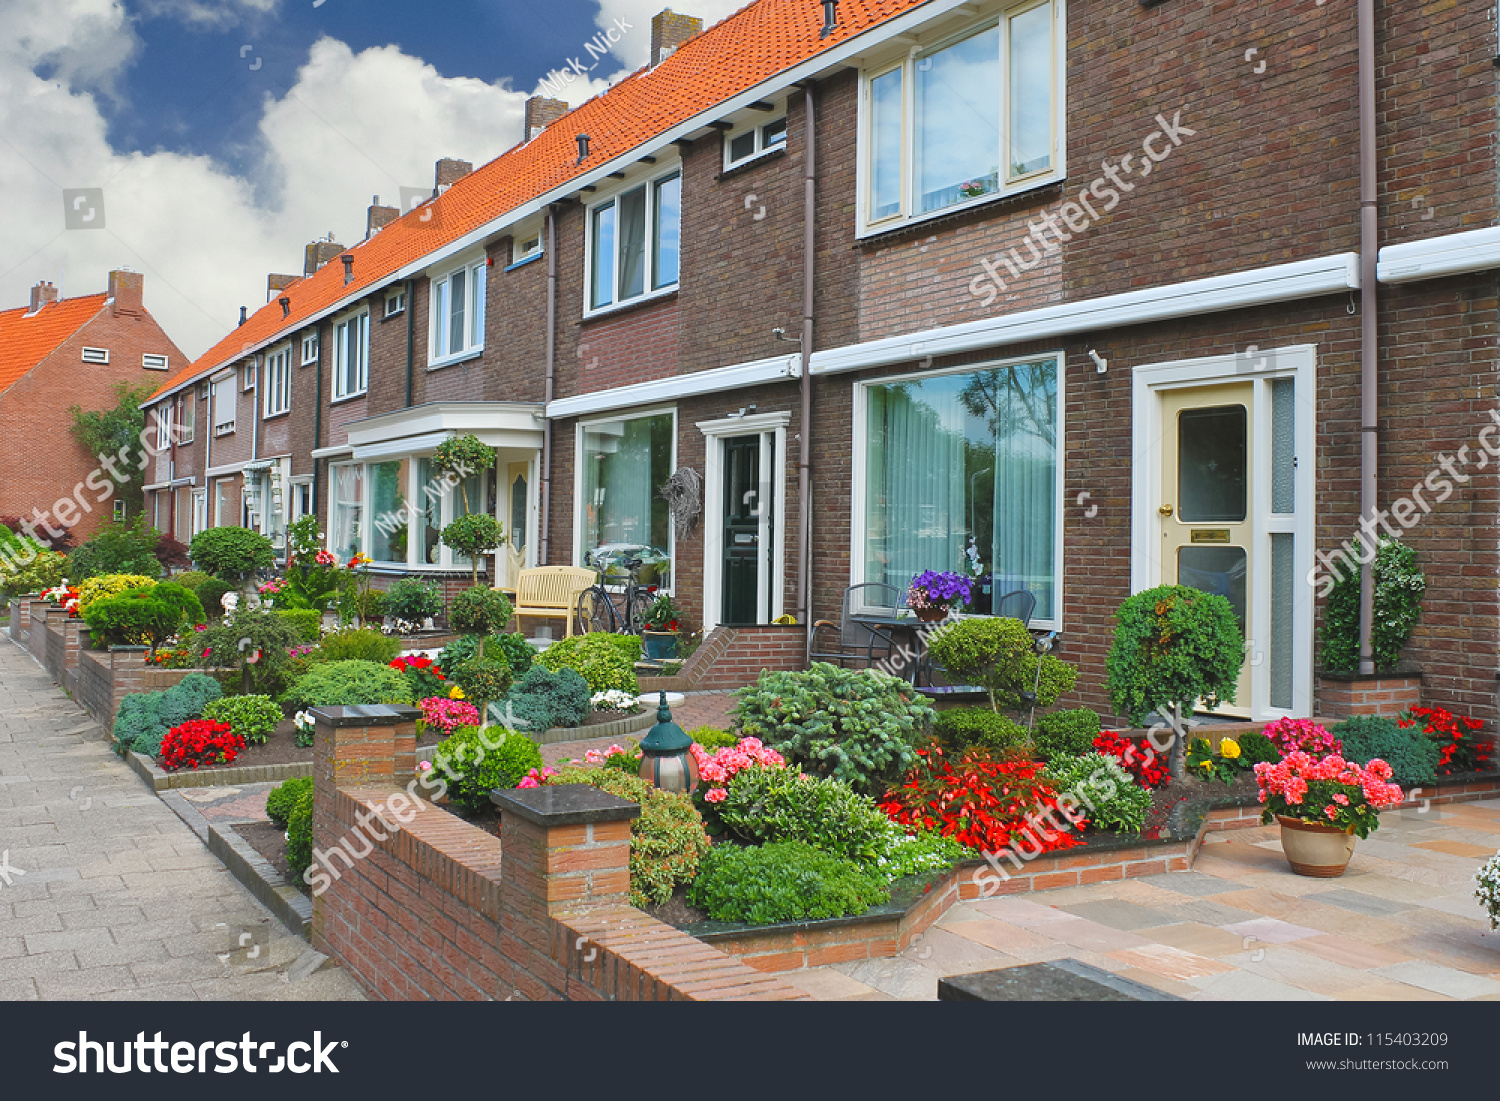 stock-photo-small-garden-in-front-of-the